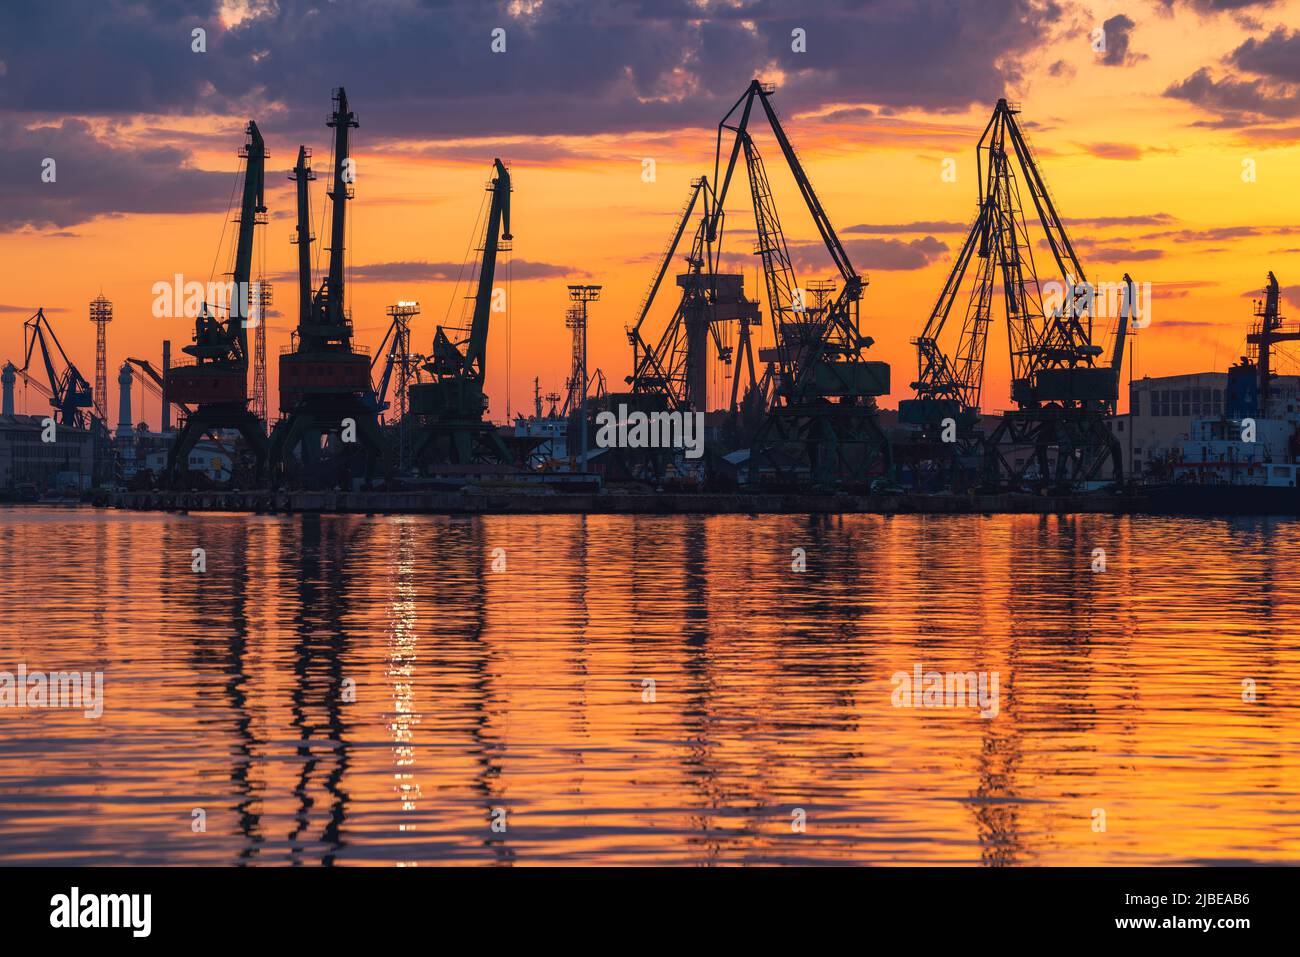 Colorful sunset over sea port and industrial cranes, Varna, Bulgaria Stock Photo